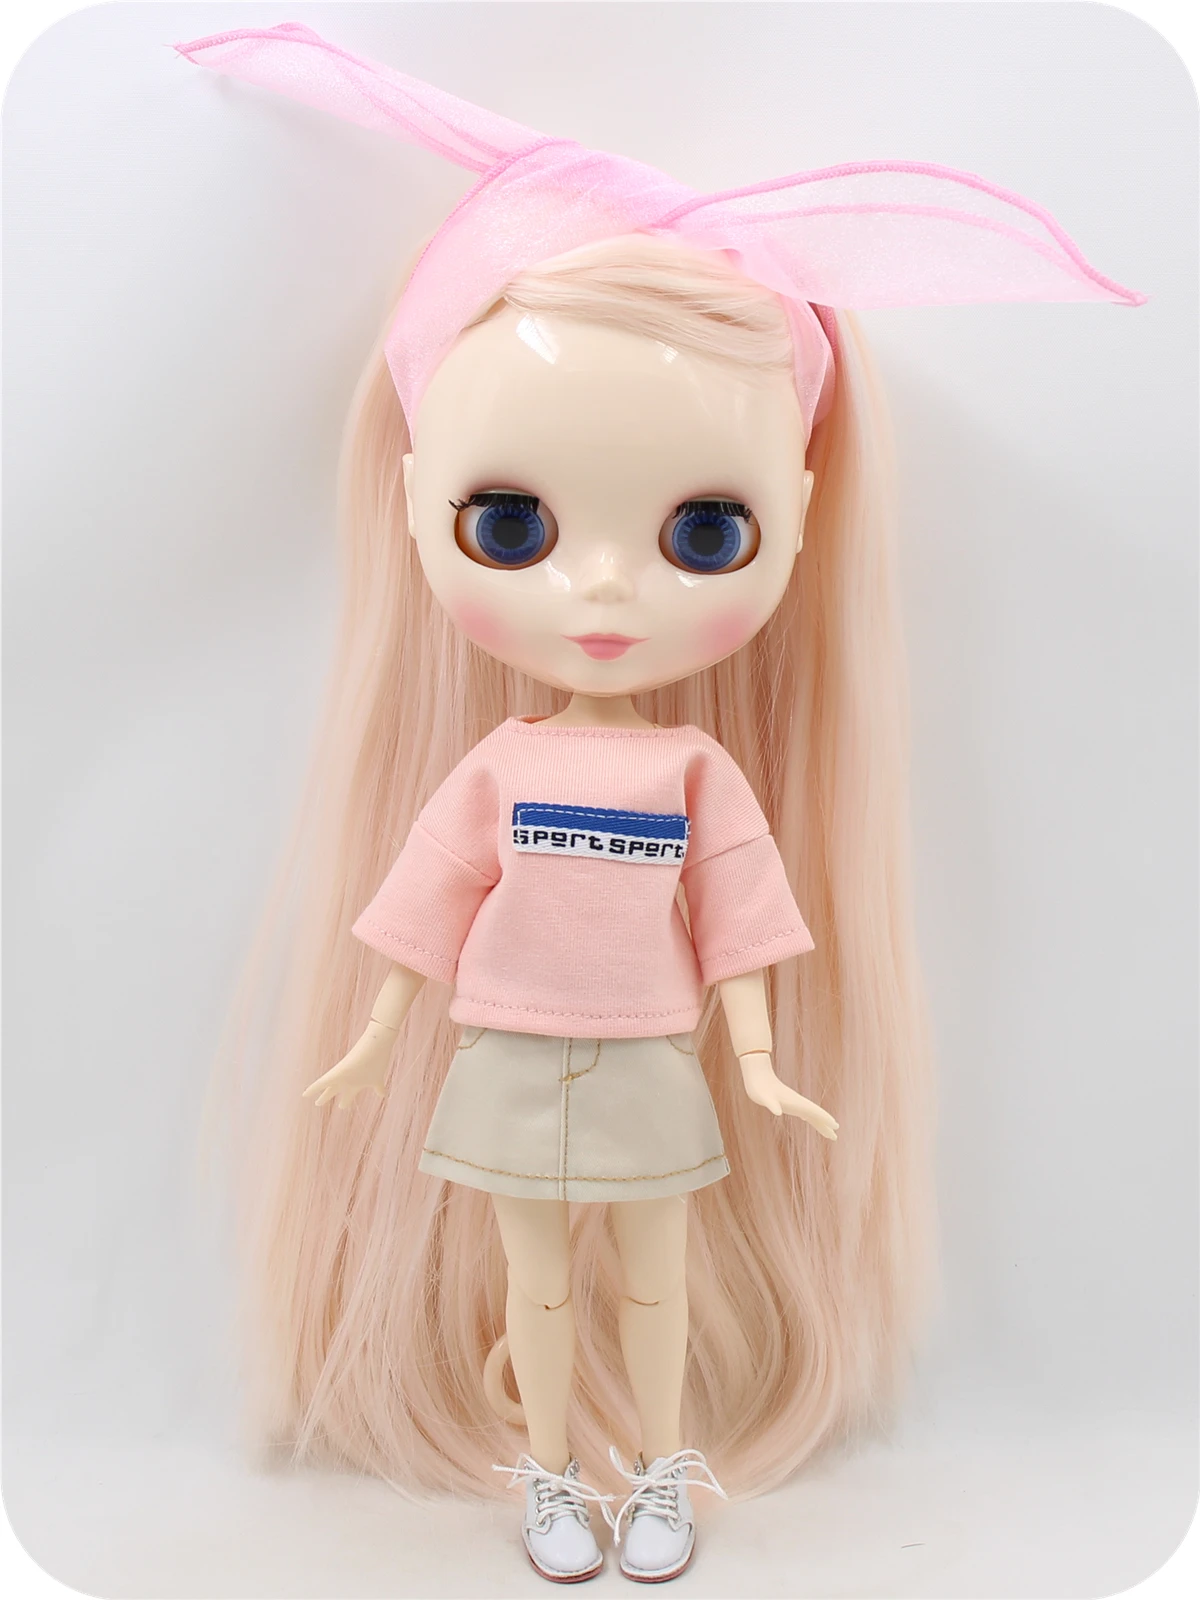 Neo Blythe Doll with Pink Hair, White Skin, Shiny Cute Face & Factory Jointed Body 1